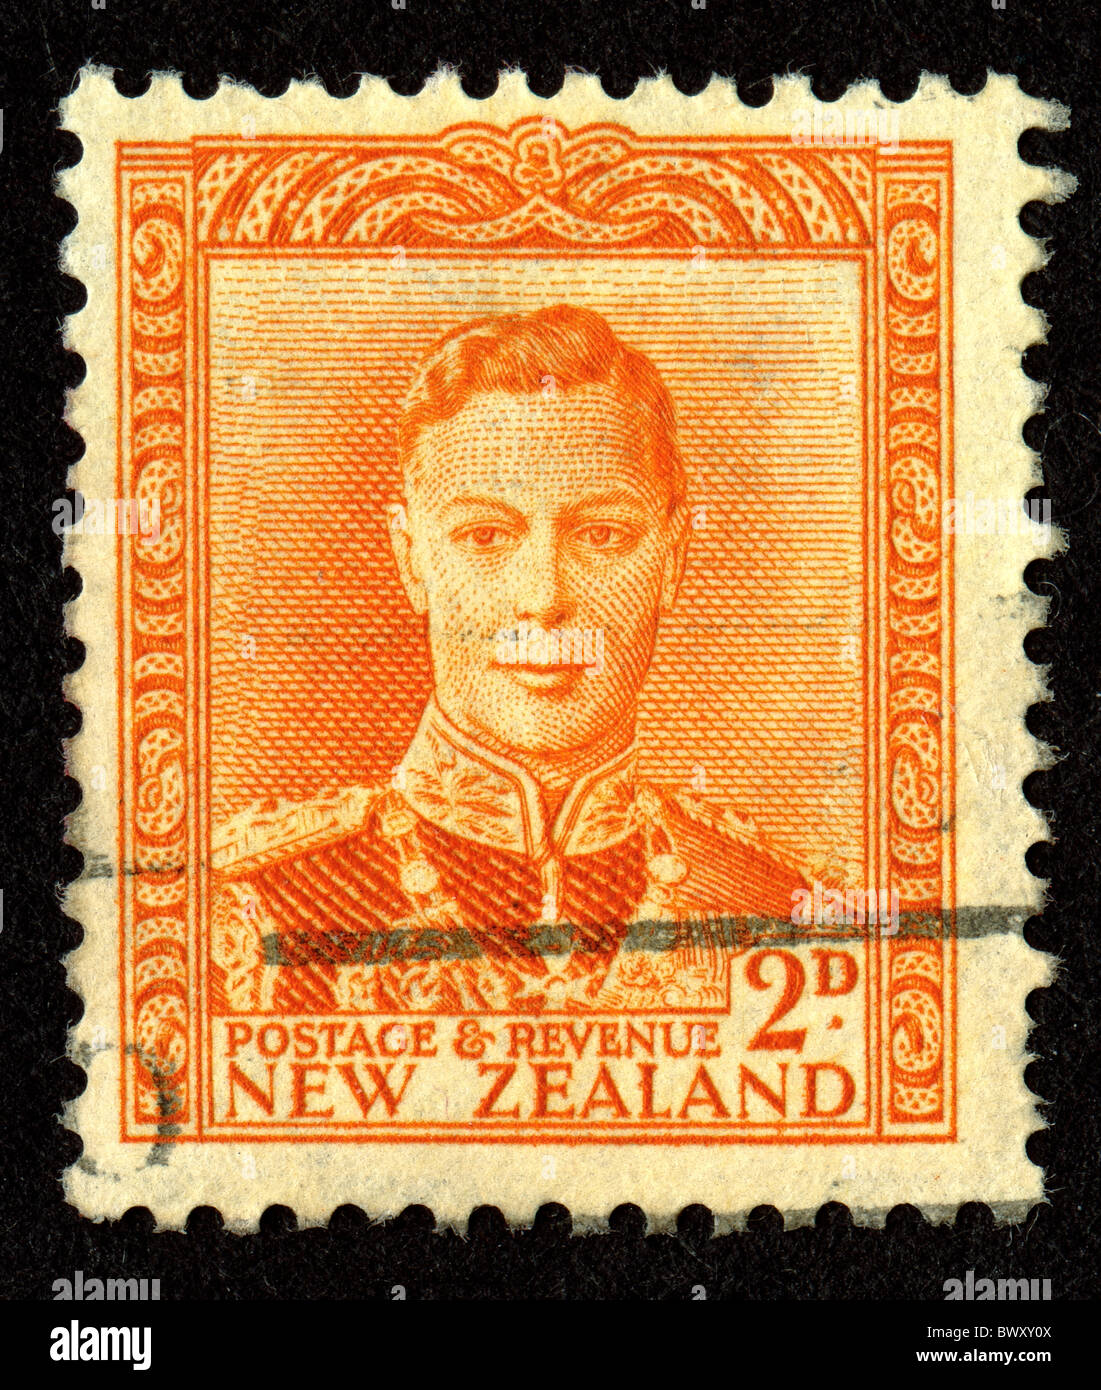 Vintage postage stamp from New Zealand Stock Photo